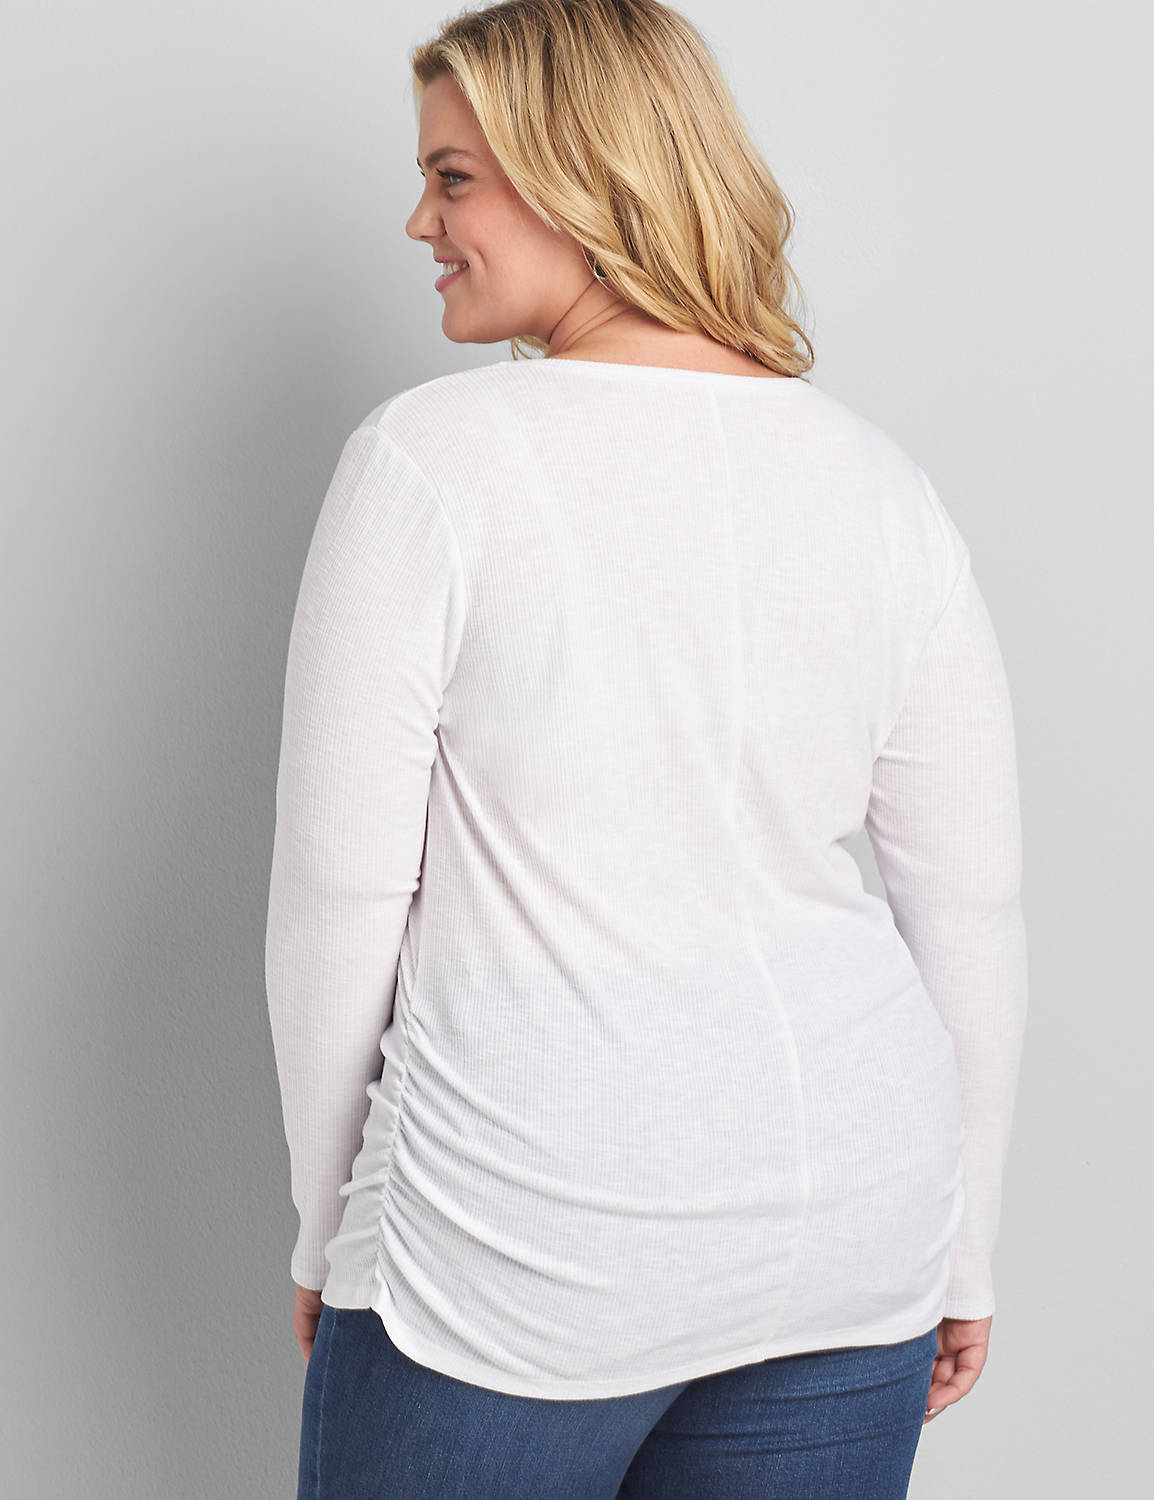 Long-Sleeve Ribbed Ruched Side Tee Product Image 2